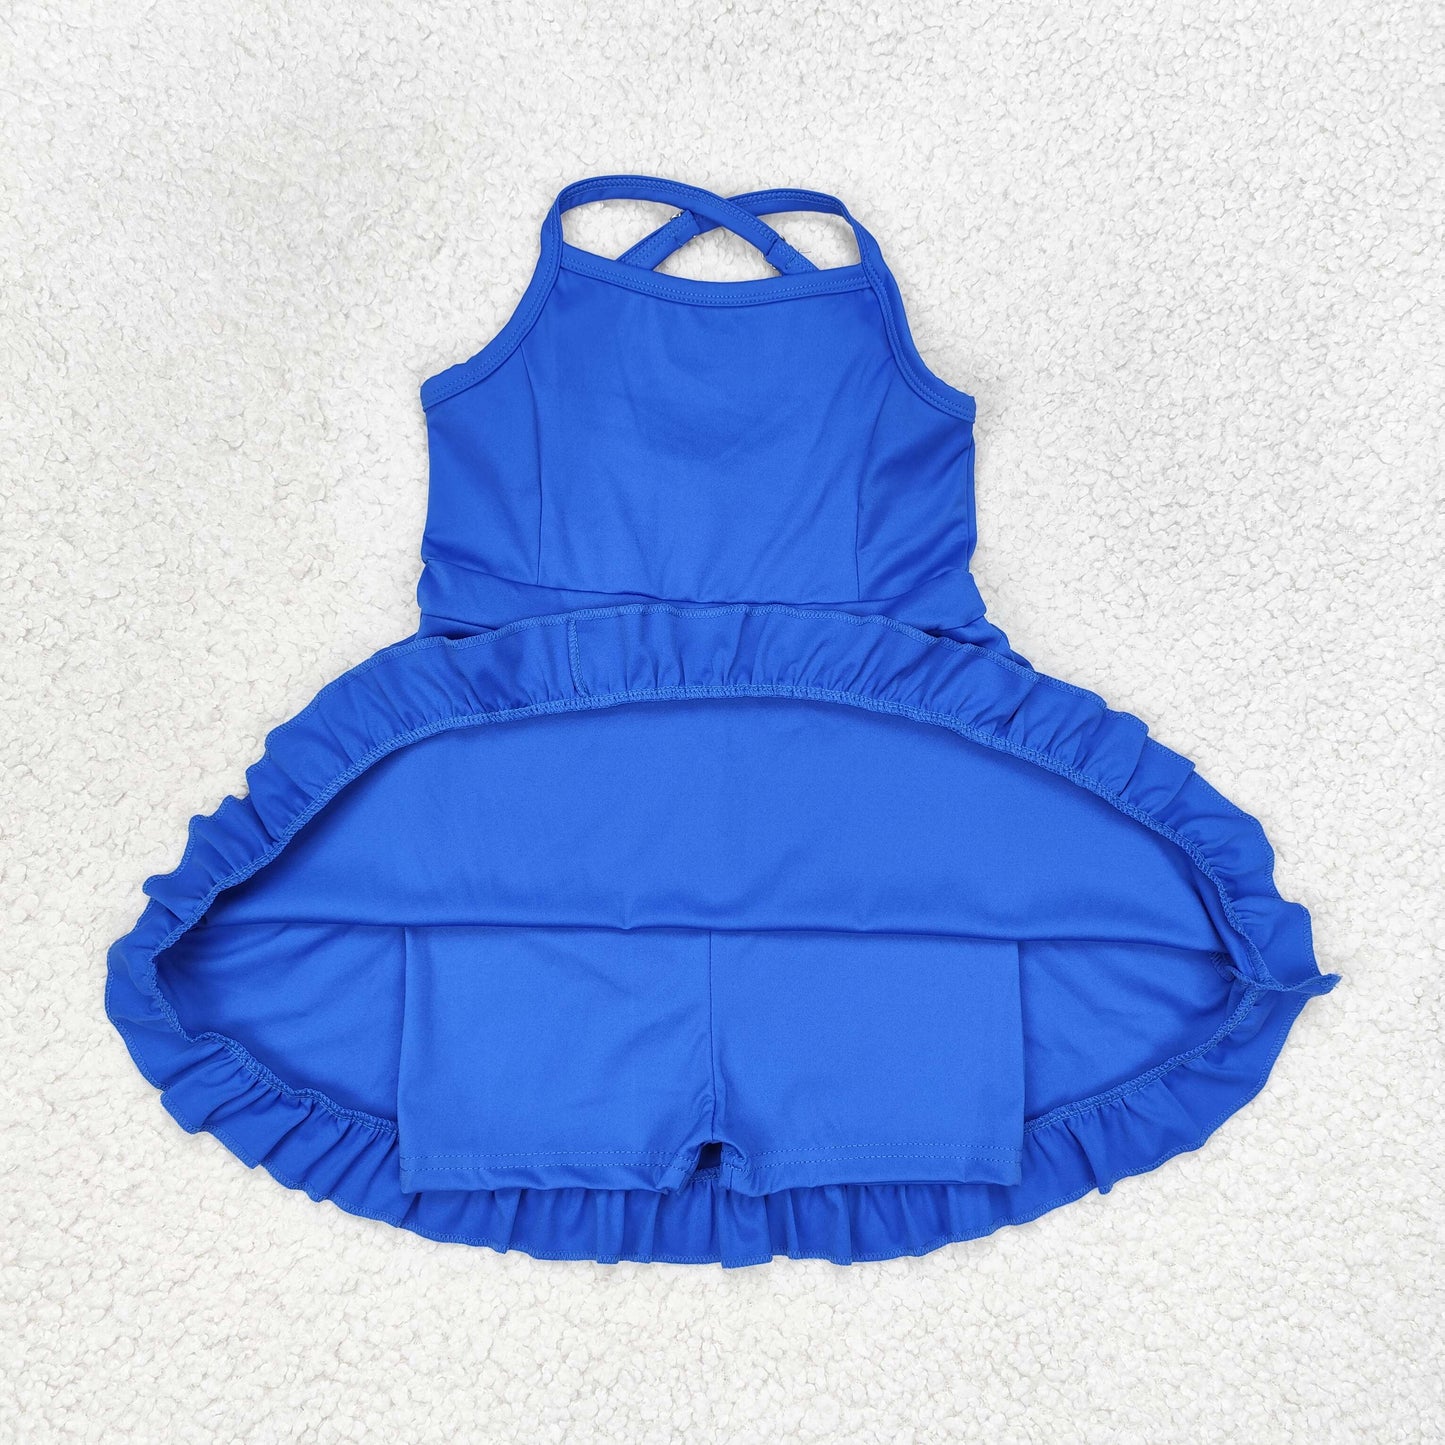 S0445 Blue Color Girls Knee Length Shorts Sports Dress 1 Pieces Swimsuits